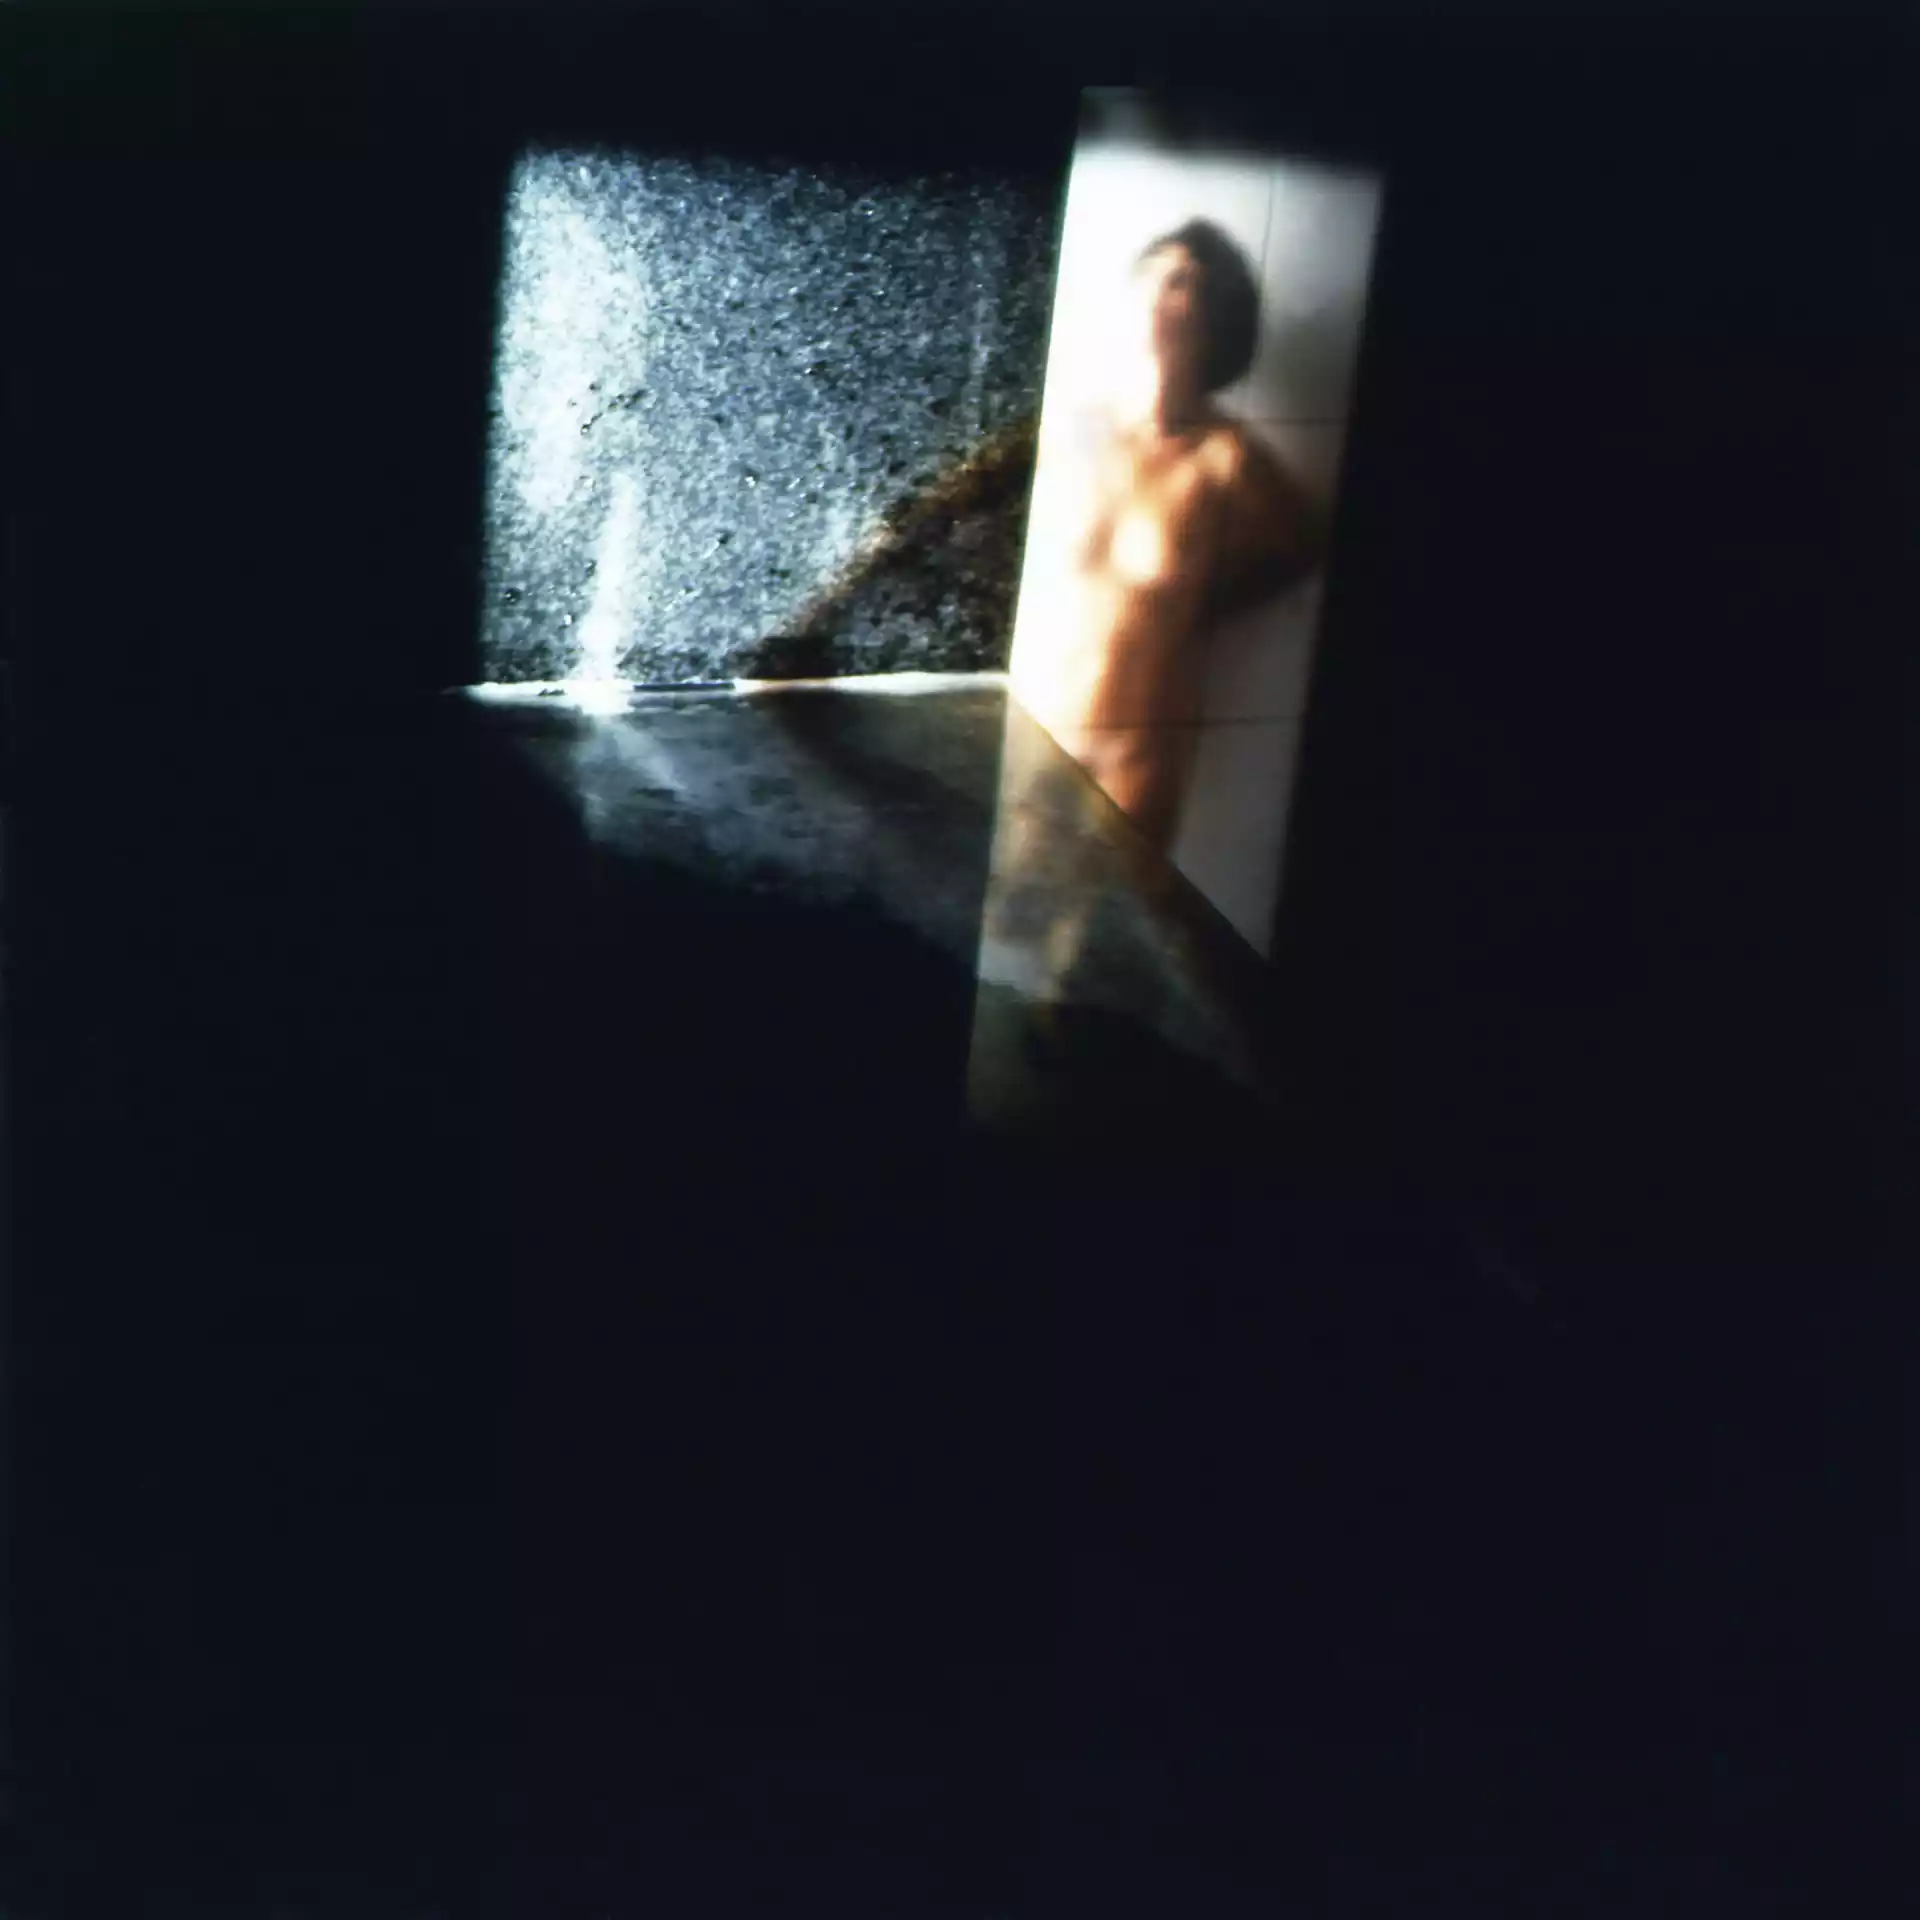 2005_oeuvres_projection_photographie_Japon_corps_bain_contemporain_carrelage_blanc_buee_onsen